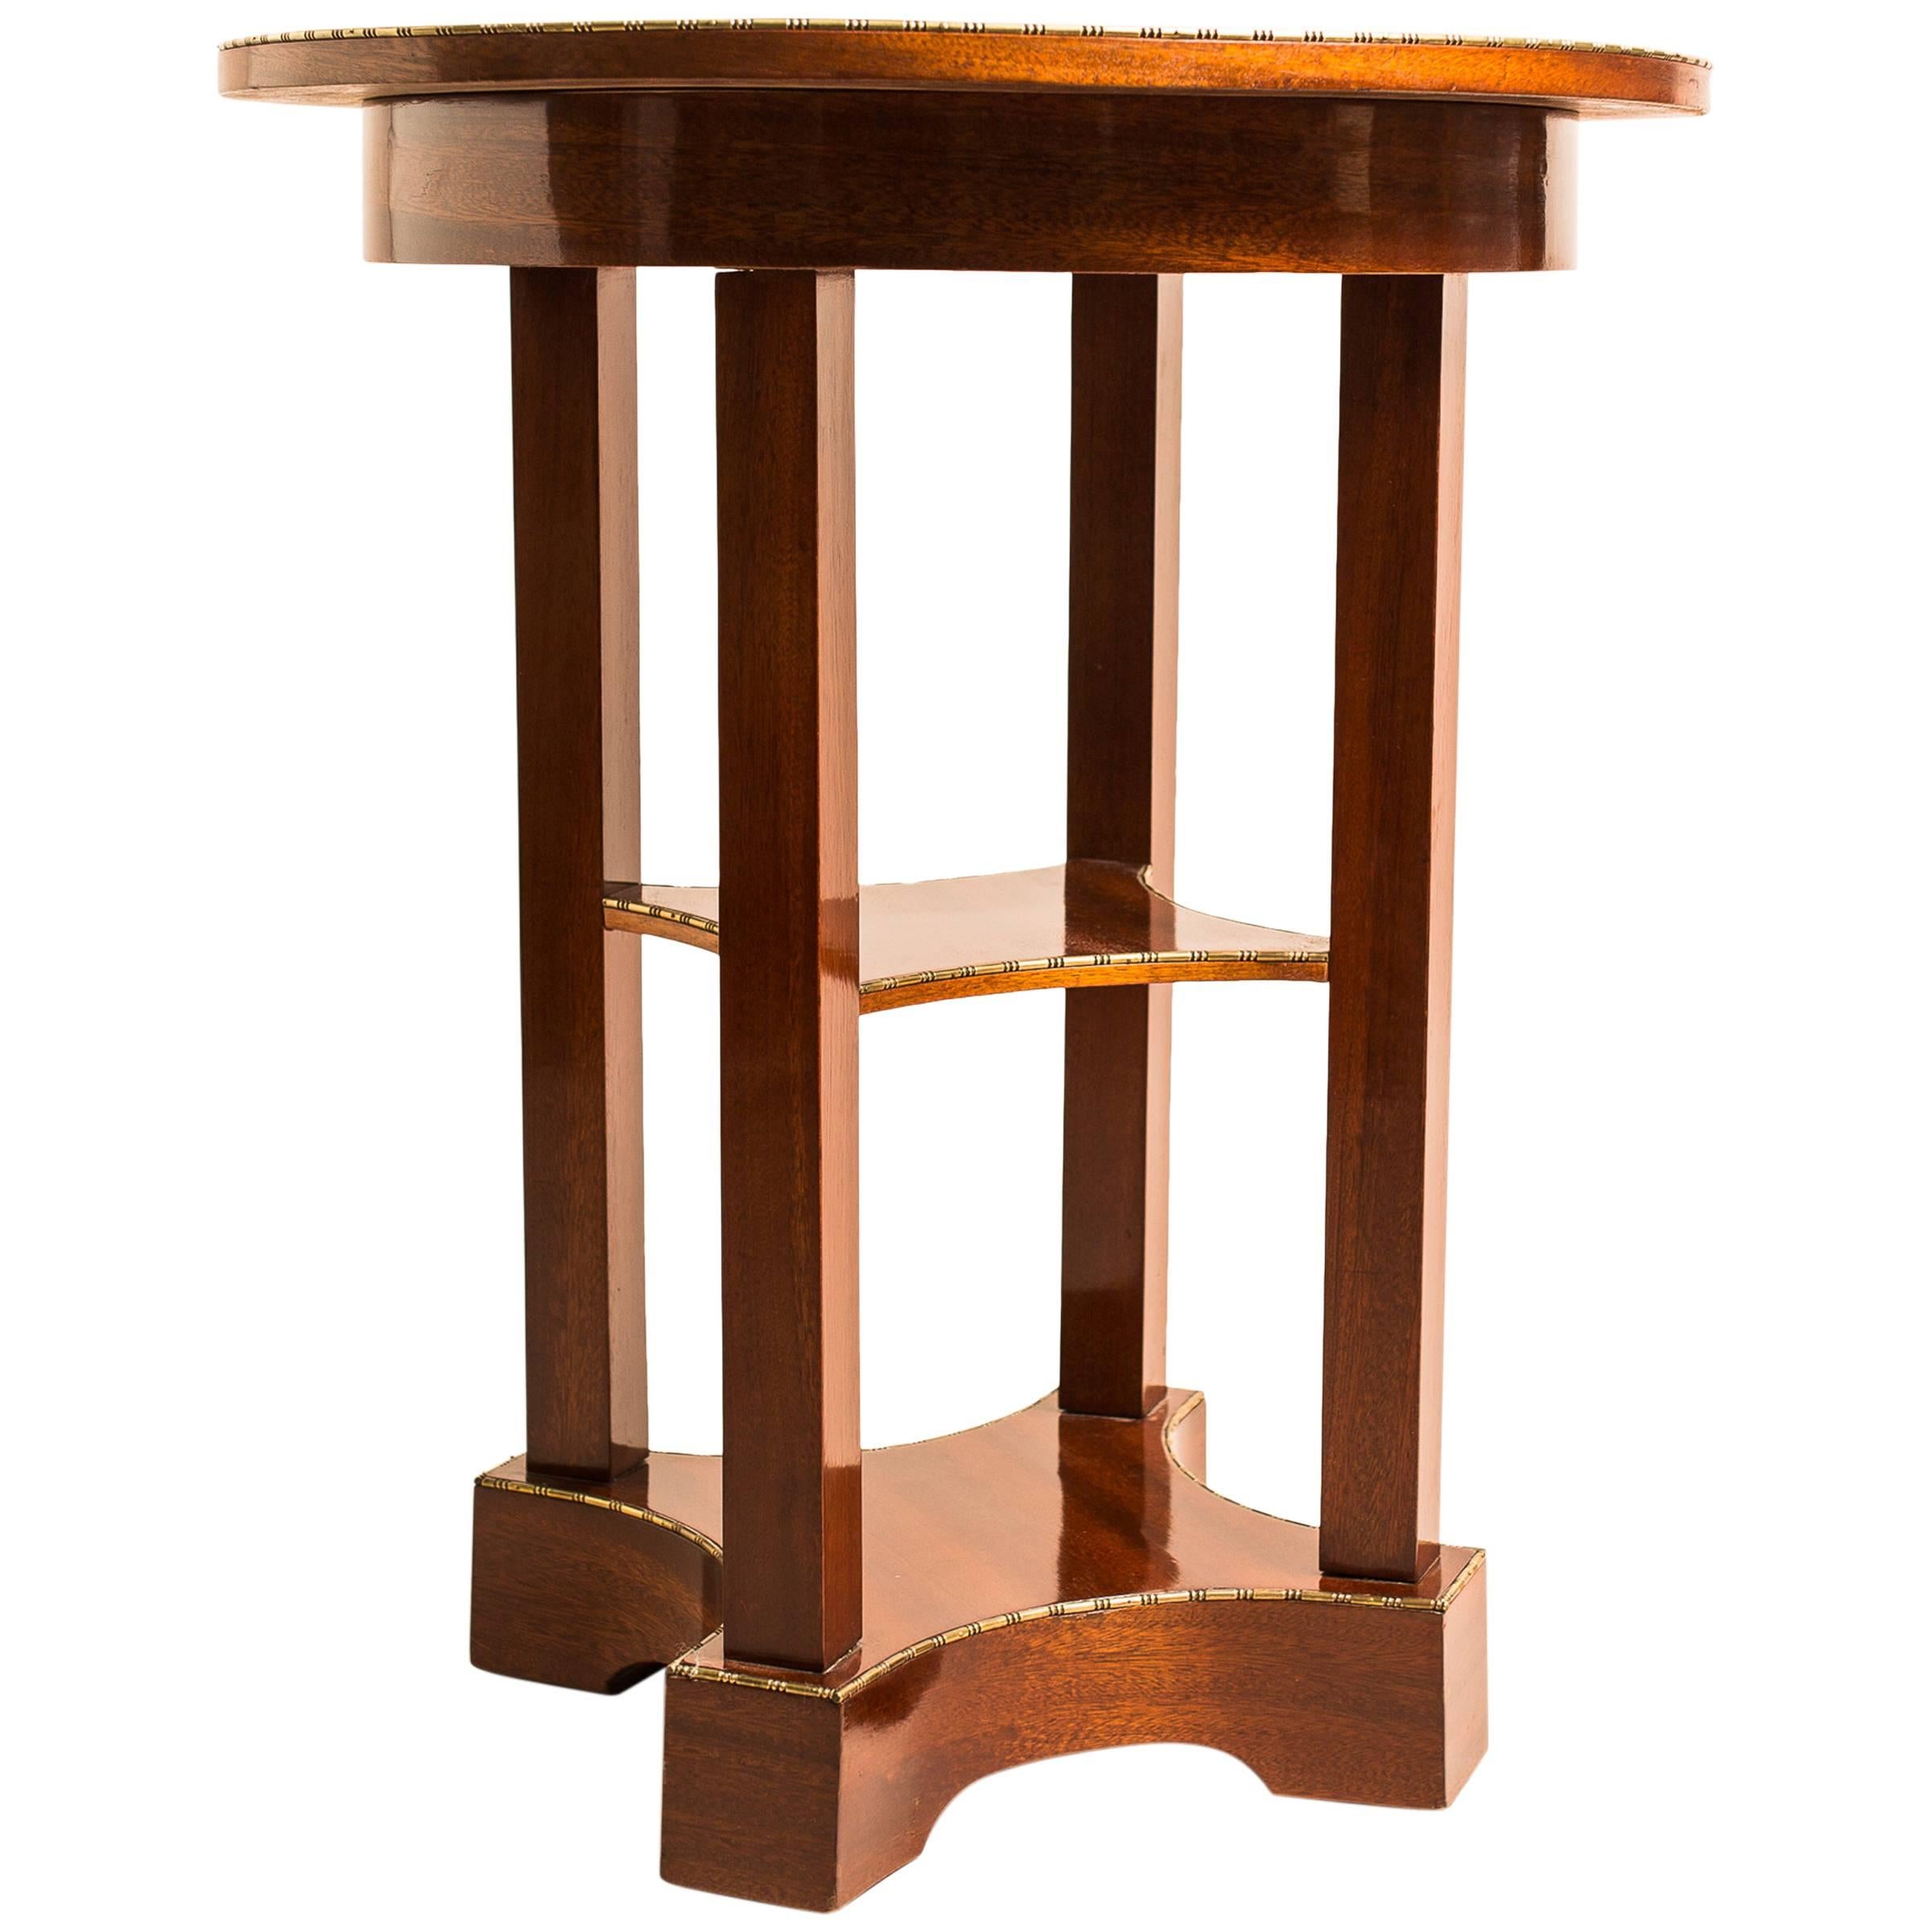 Very pleasing round Austrian mahogany side table from the early 20th century, circa 1910. A valuable piece of Viennese furniture, made with finest mahogany veneer. The round top plate sits on four square columns which are mounted on a fantastic